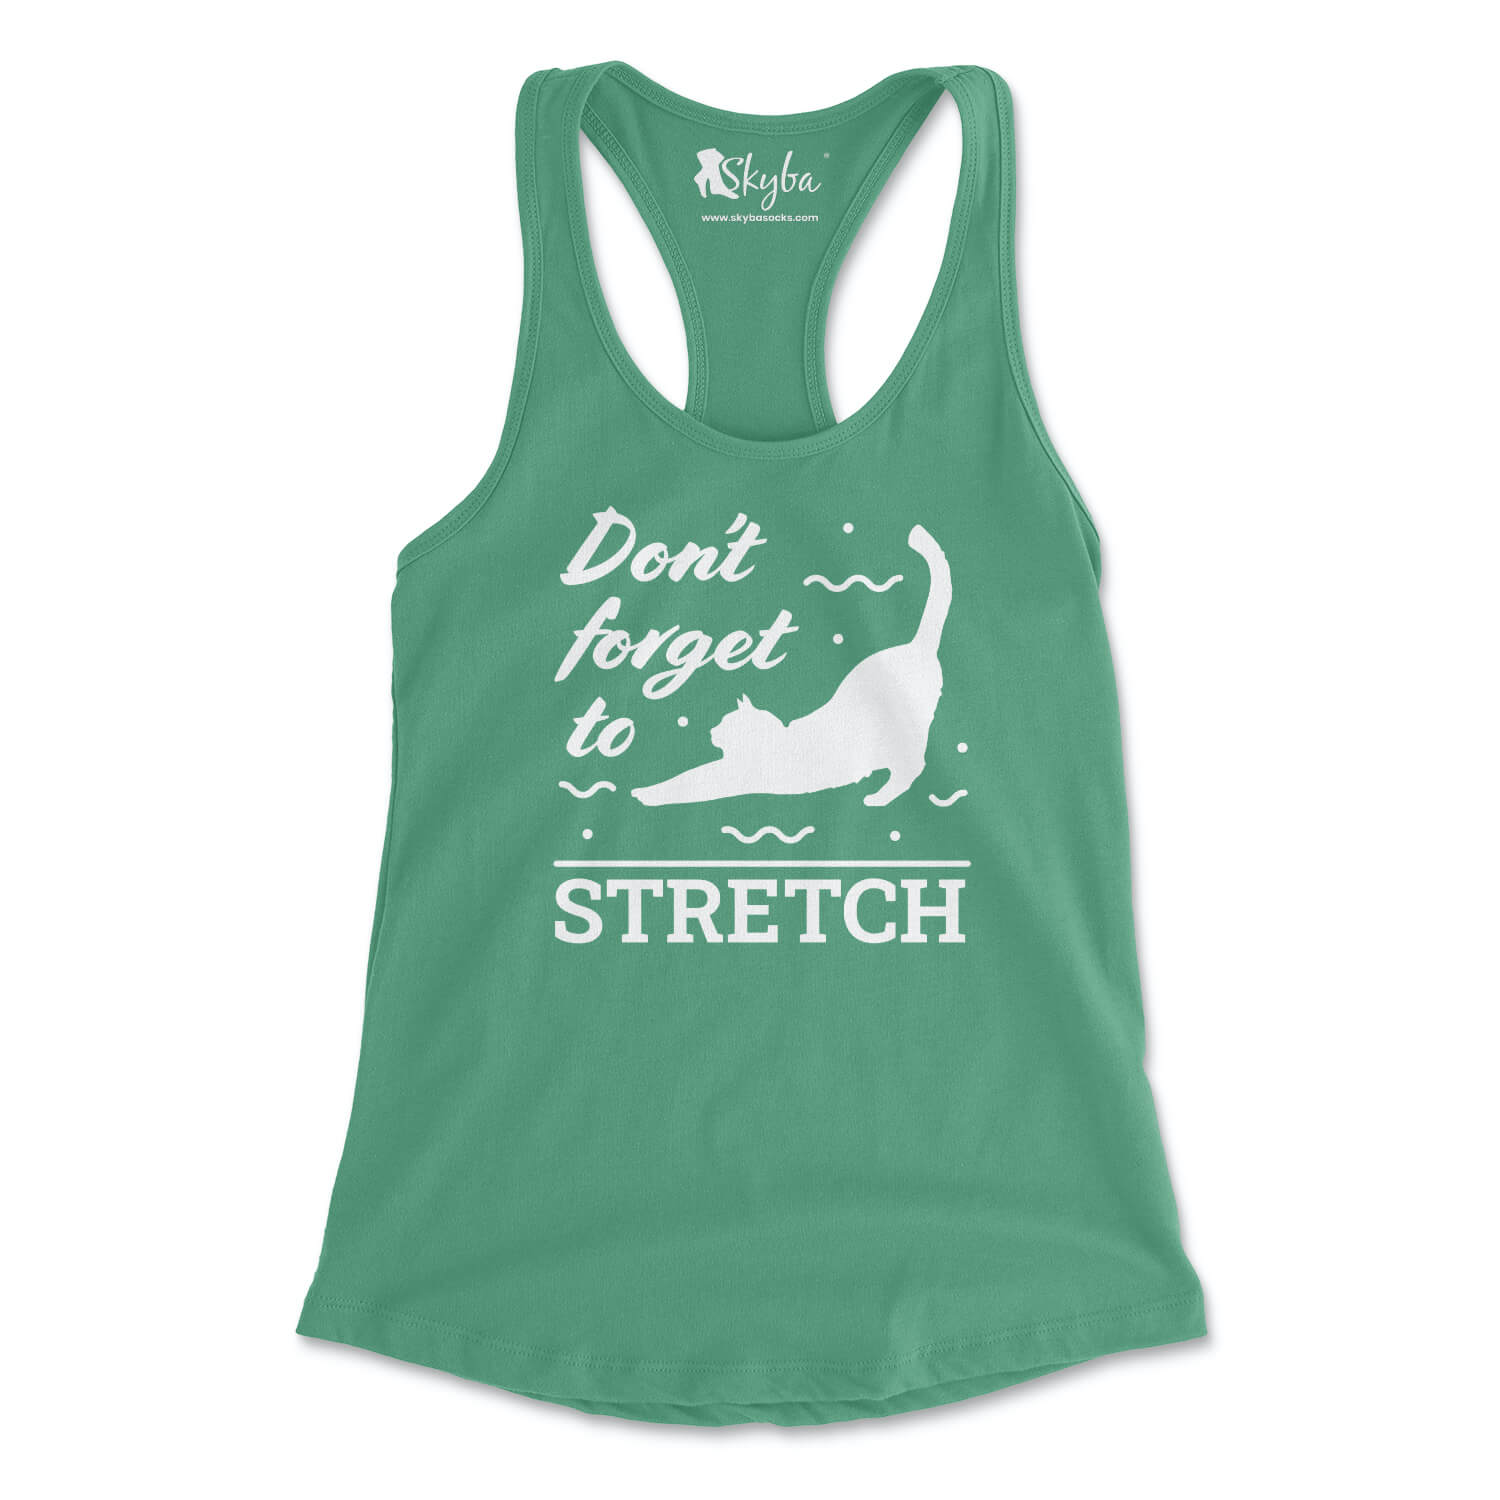 Don't Forget to Stretch - Women's Slim Fit Tank Skyba Tank Top